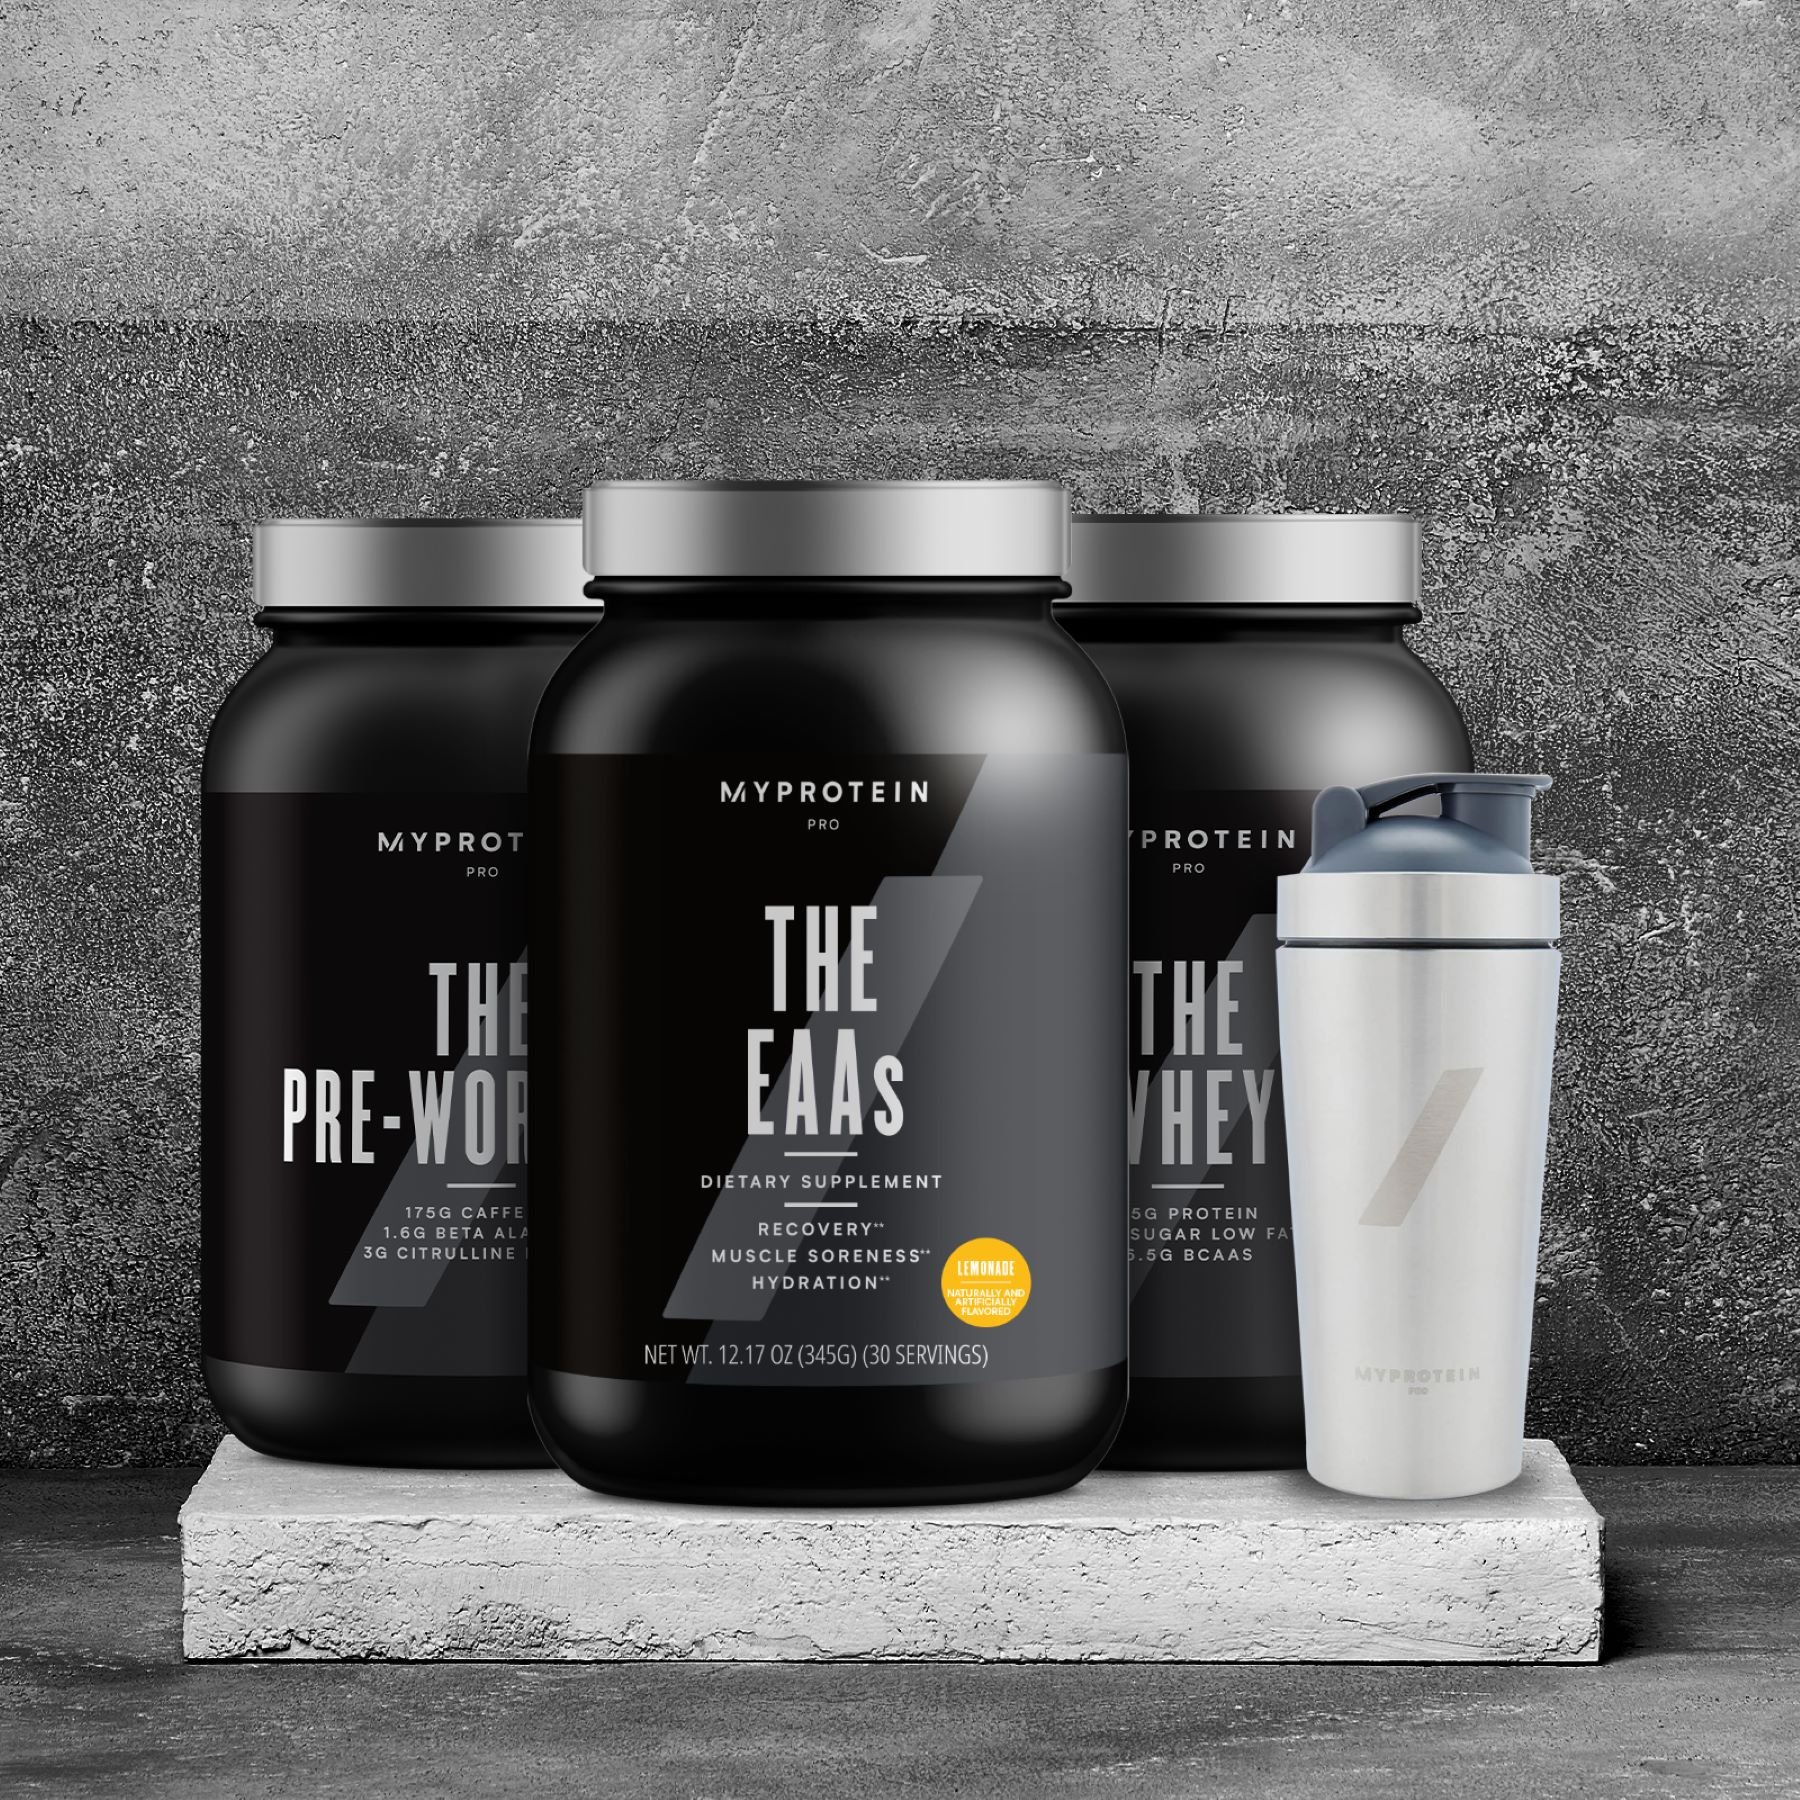 For Those Who Want Most | THE PRO Range Introduces THE EAAs & All New Pre-Workout Flavors